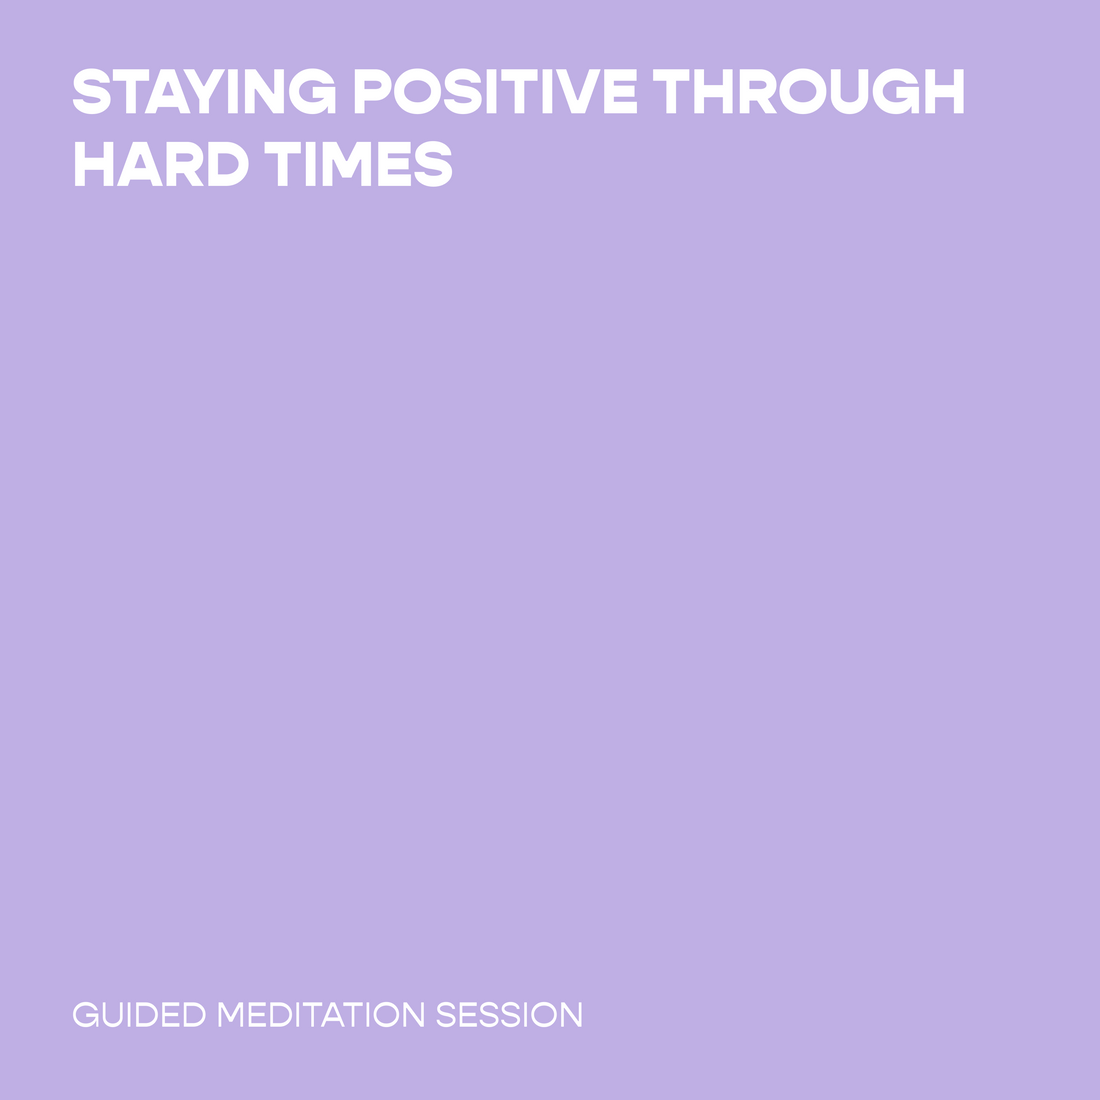 Staying Positive Through Hard Times